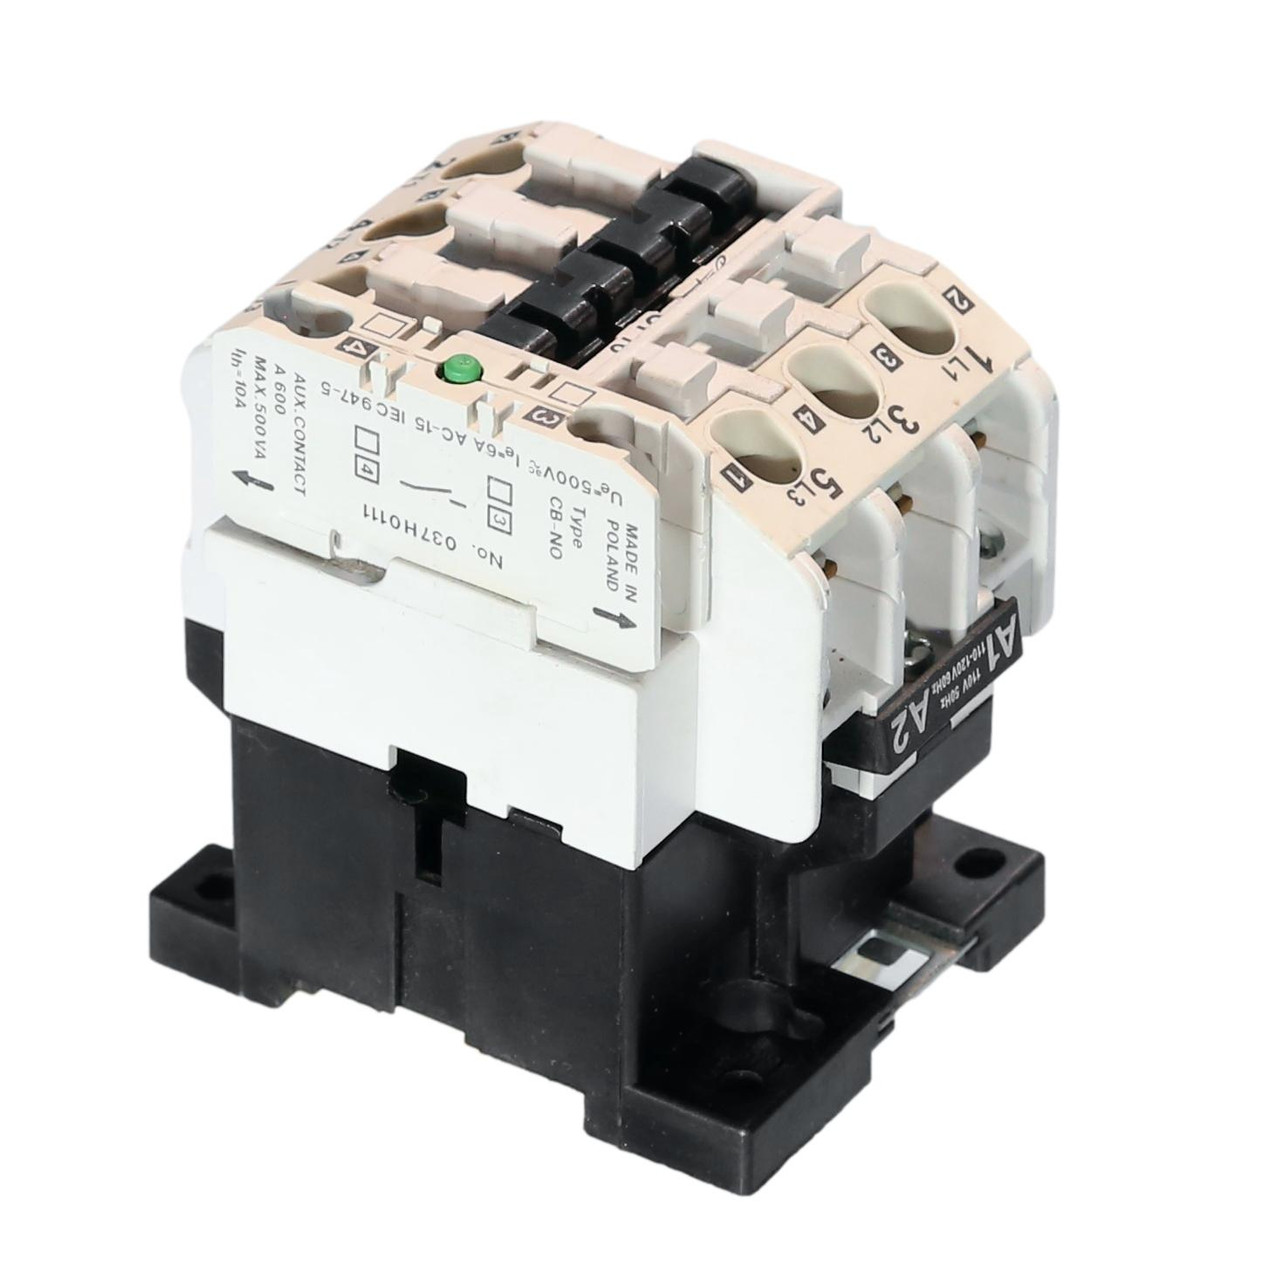 Danfoss 40A Contactor
w/N.O. Aux. Contacts